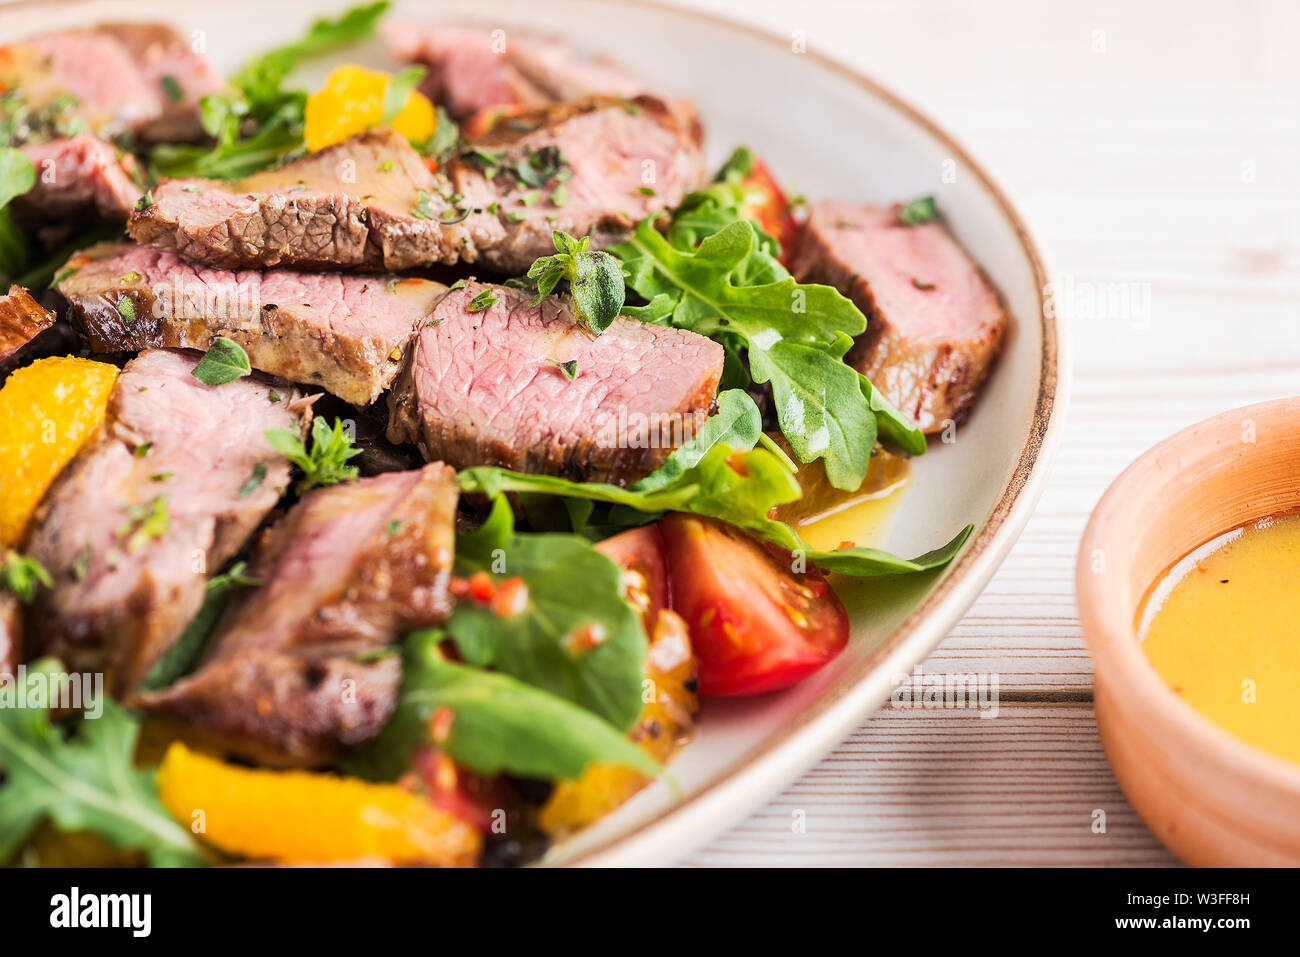 Sliced lamb leg steak salad with black beans, orange and chilli. Close up detailing salad and sauce Stock Photo